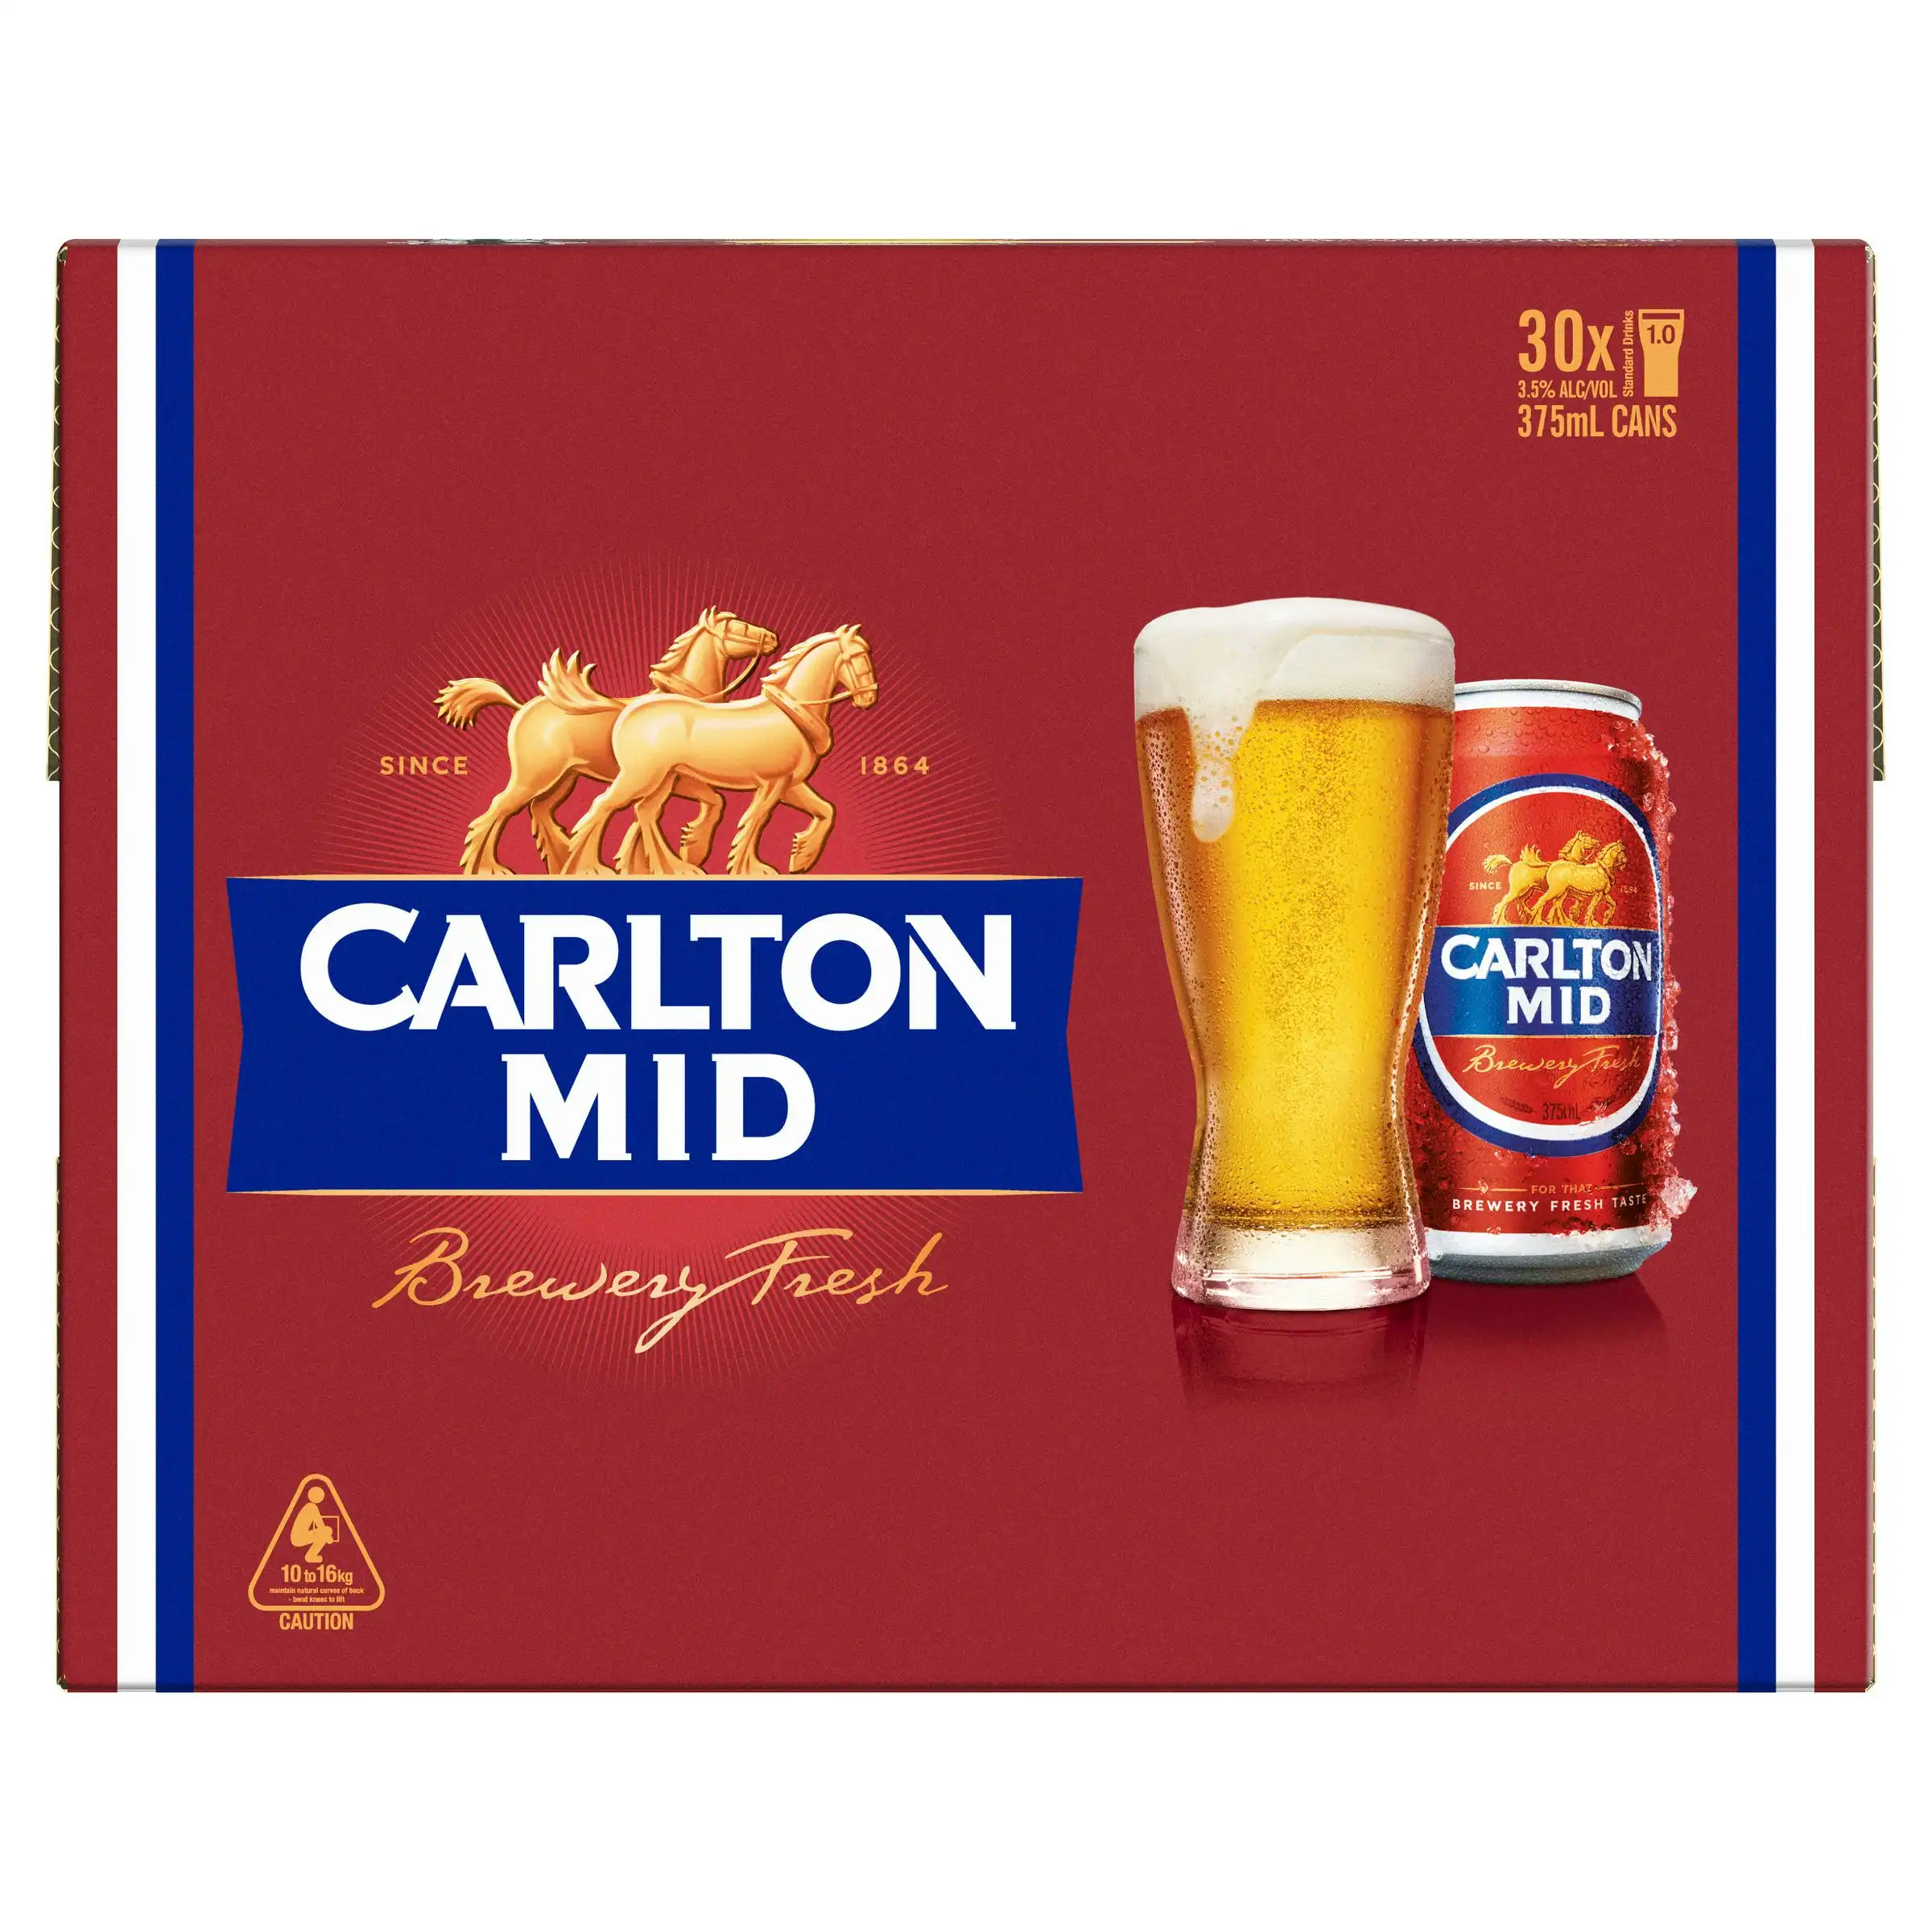 Carlton Mid Beer Case 30 x 375mL Cans